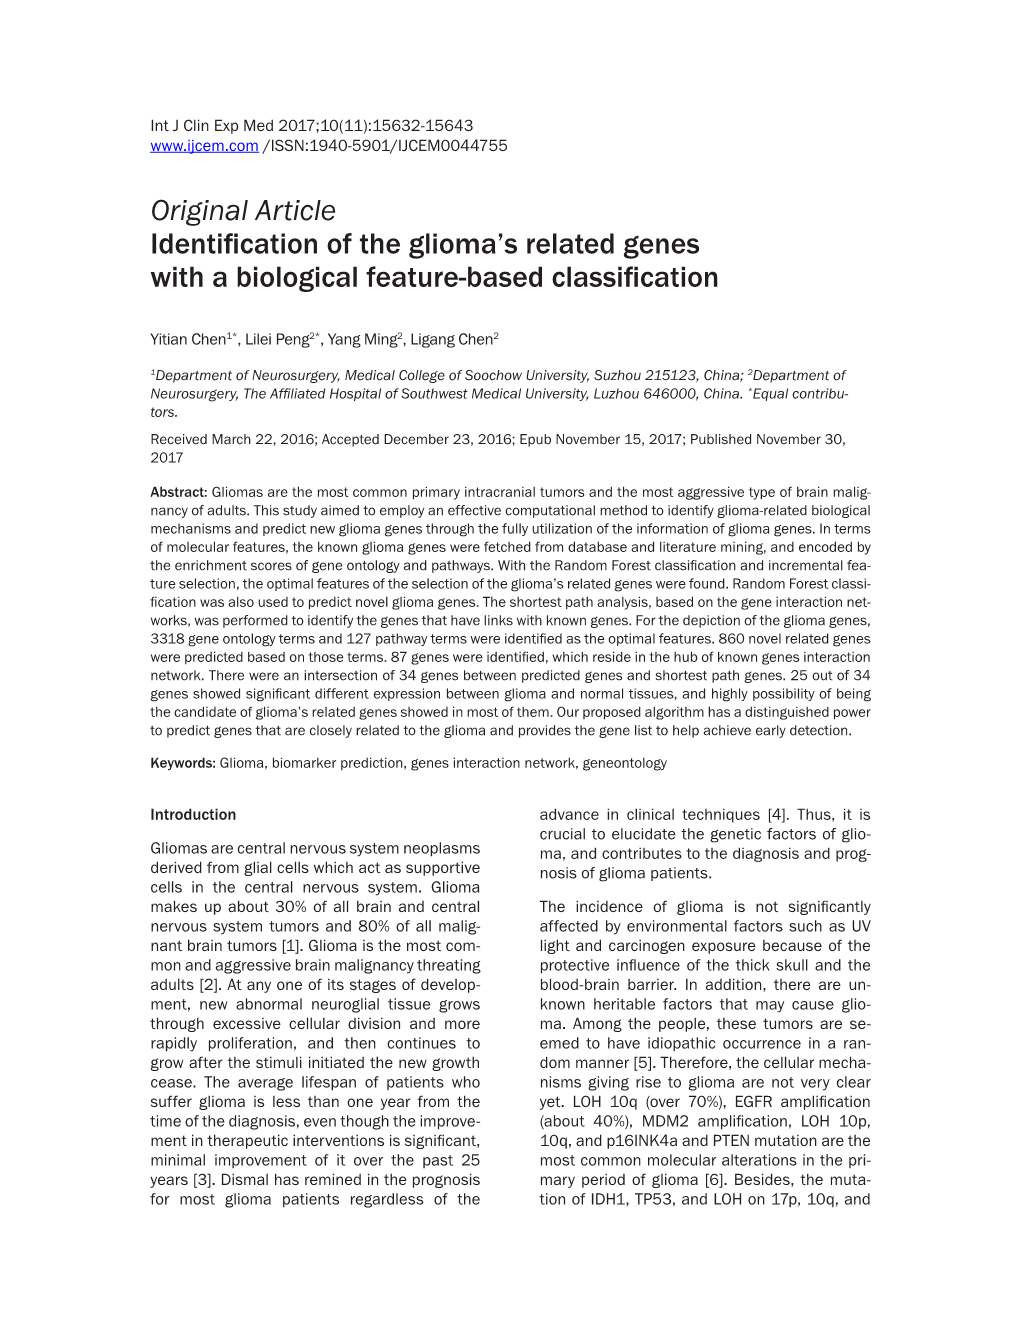 Original Article Identification of the Glioma's Related Genes with A